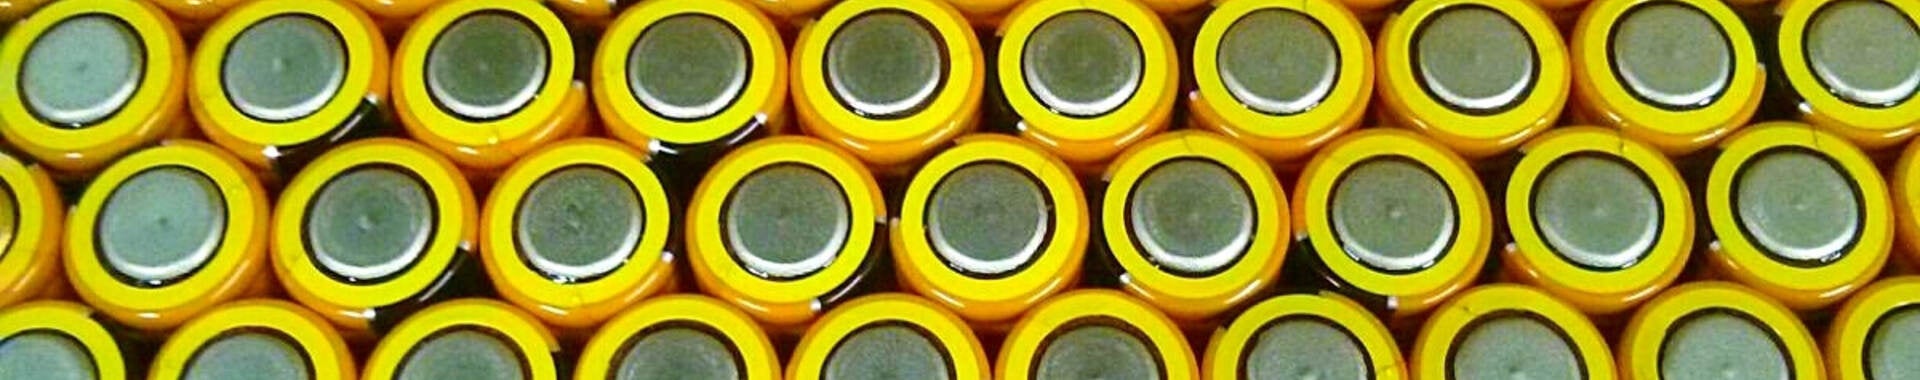 Close up of the bottoms of batteries